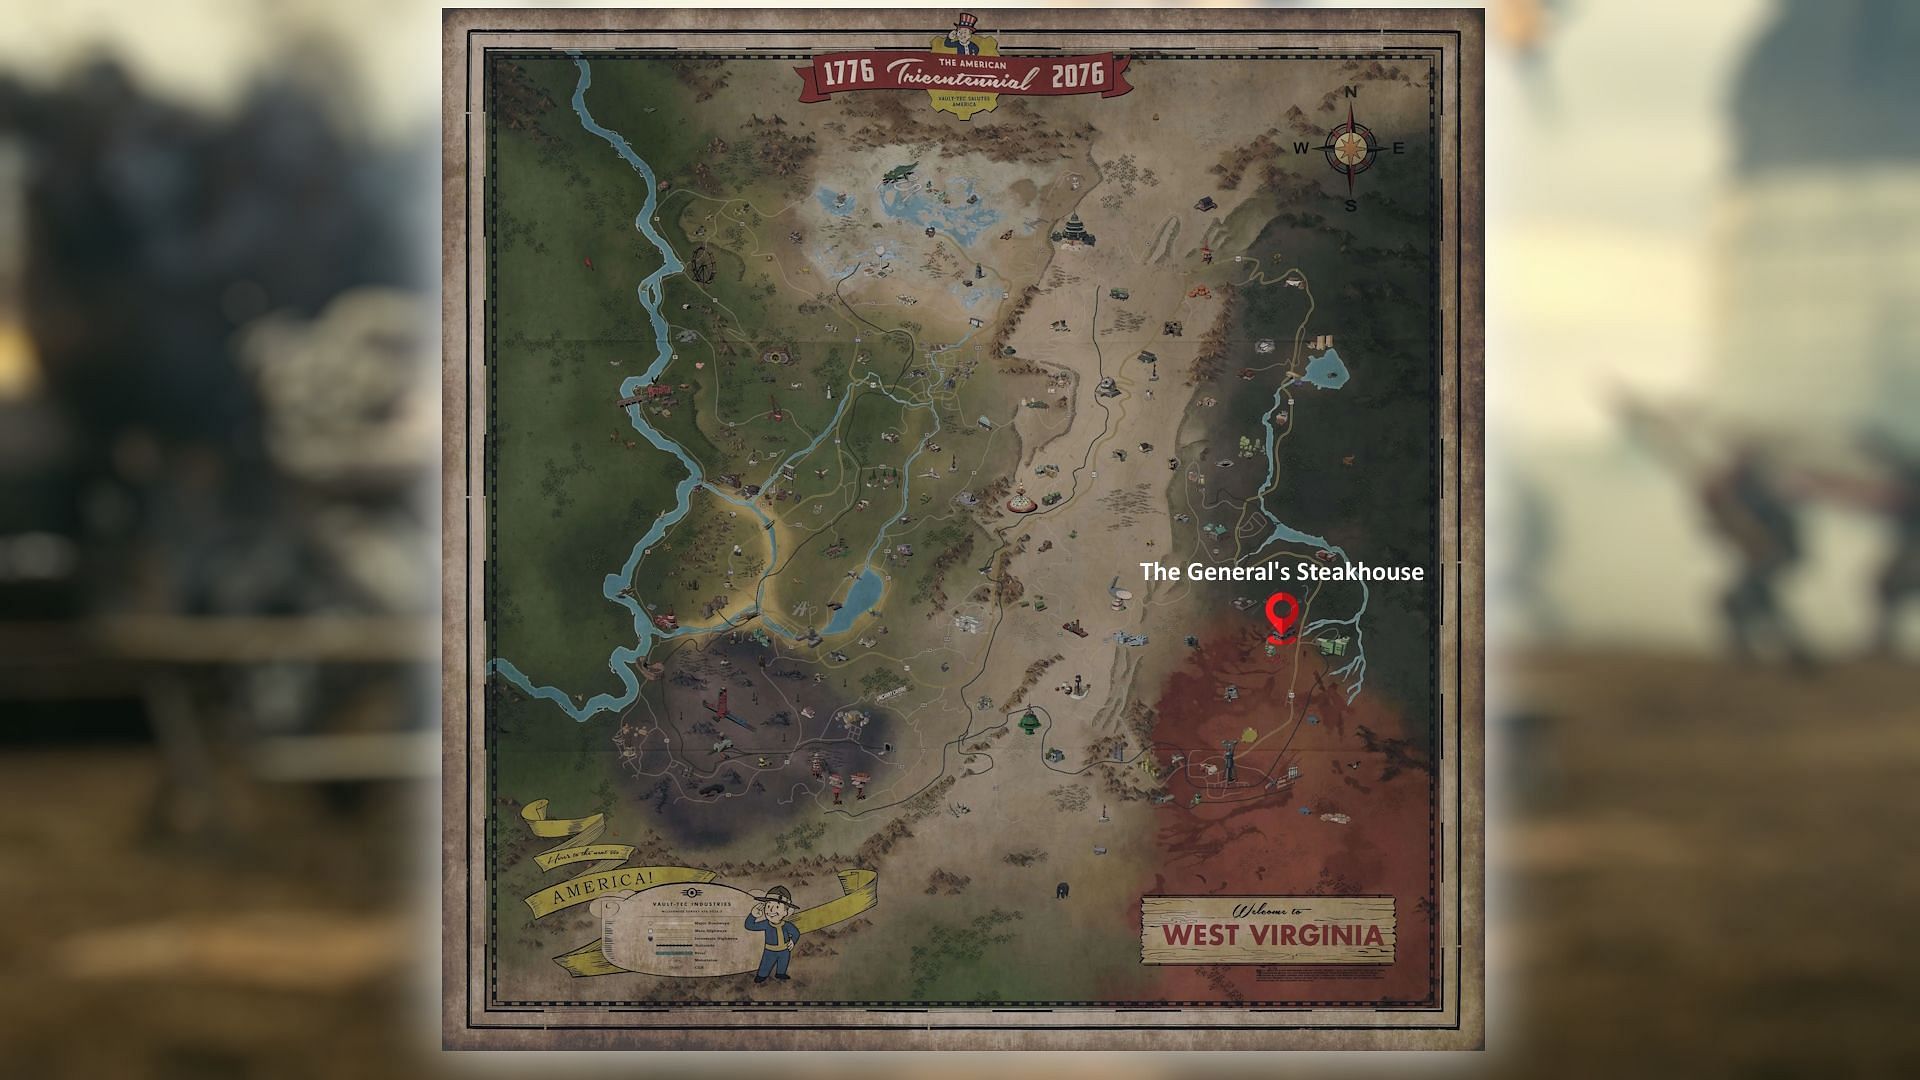 The General&#039;s Steakhouse is located in the Cranberry Bog region (Image via Bethesda Game Studios)